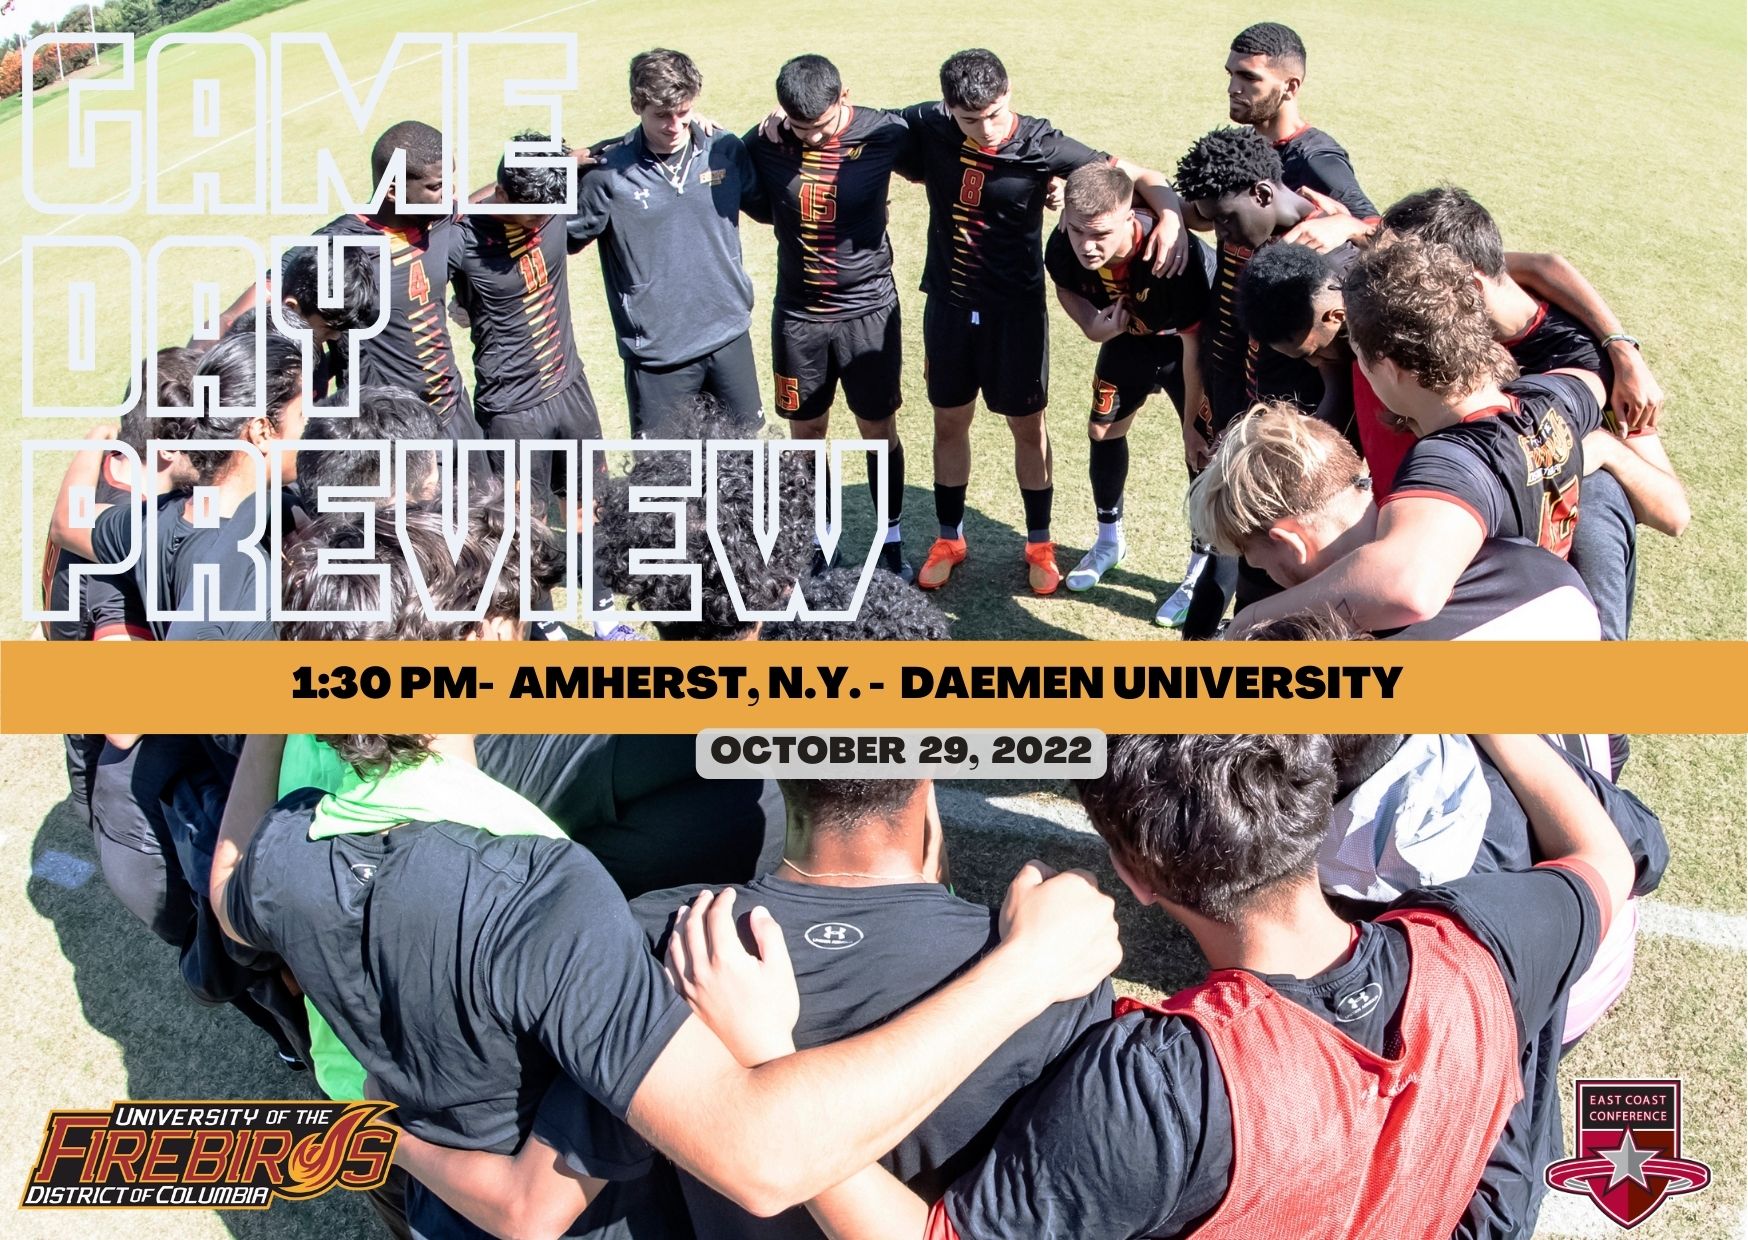 MEN'S SOCCER: GAME DAY PREVIEW 10/29